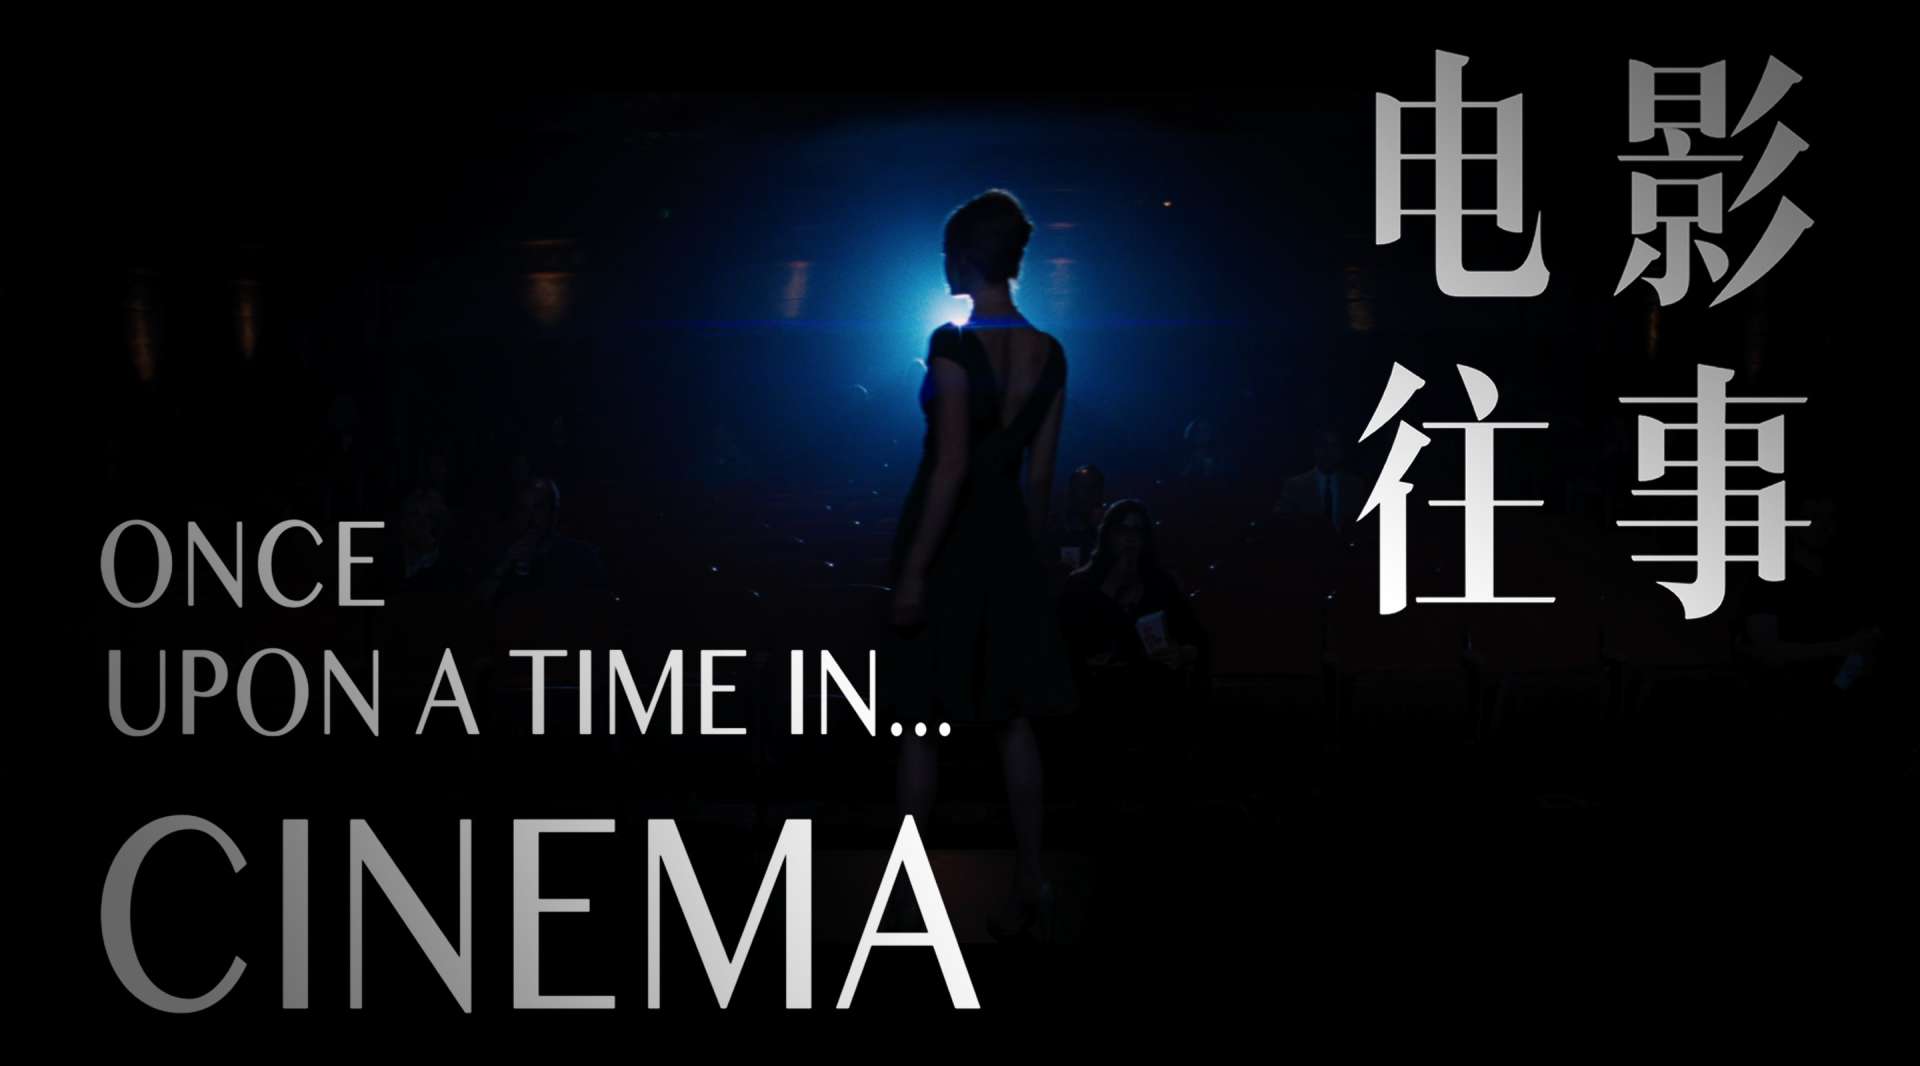 Once Upon a Time...in Cinema 【101部电影混剪】